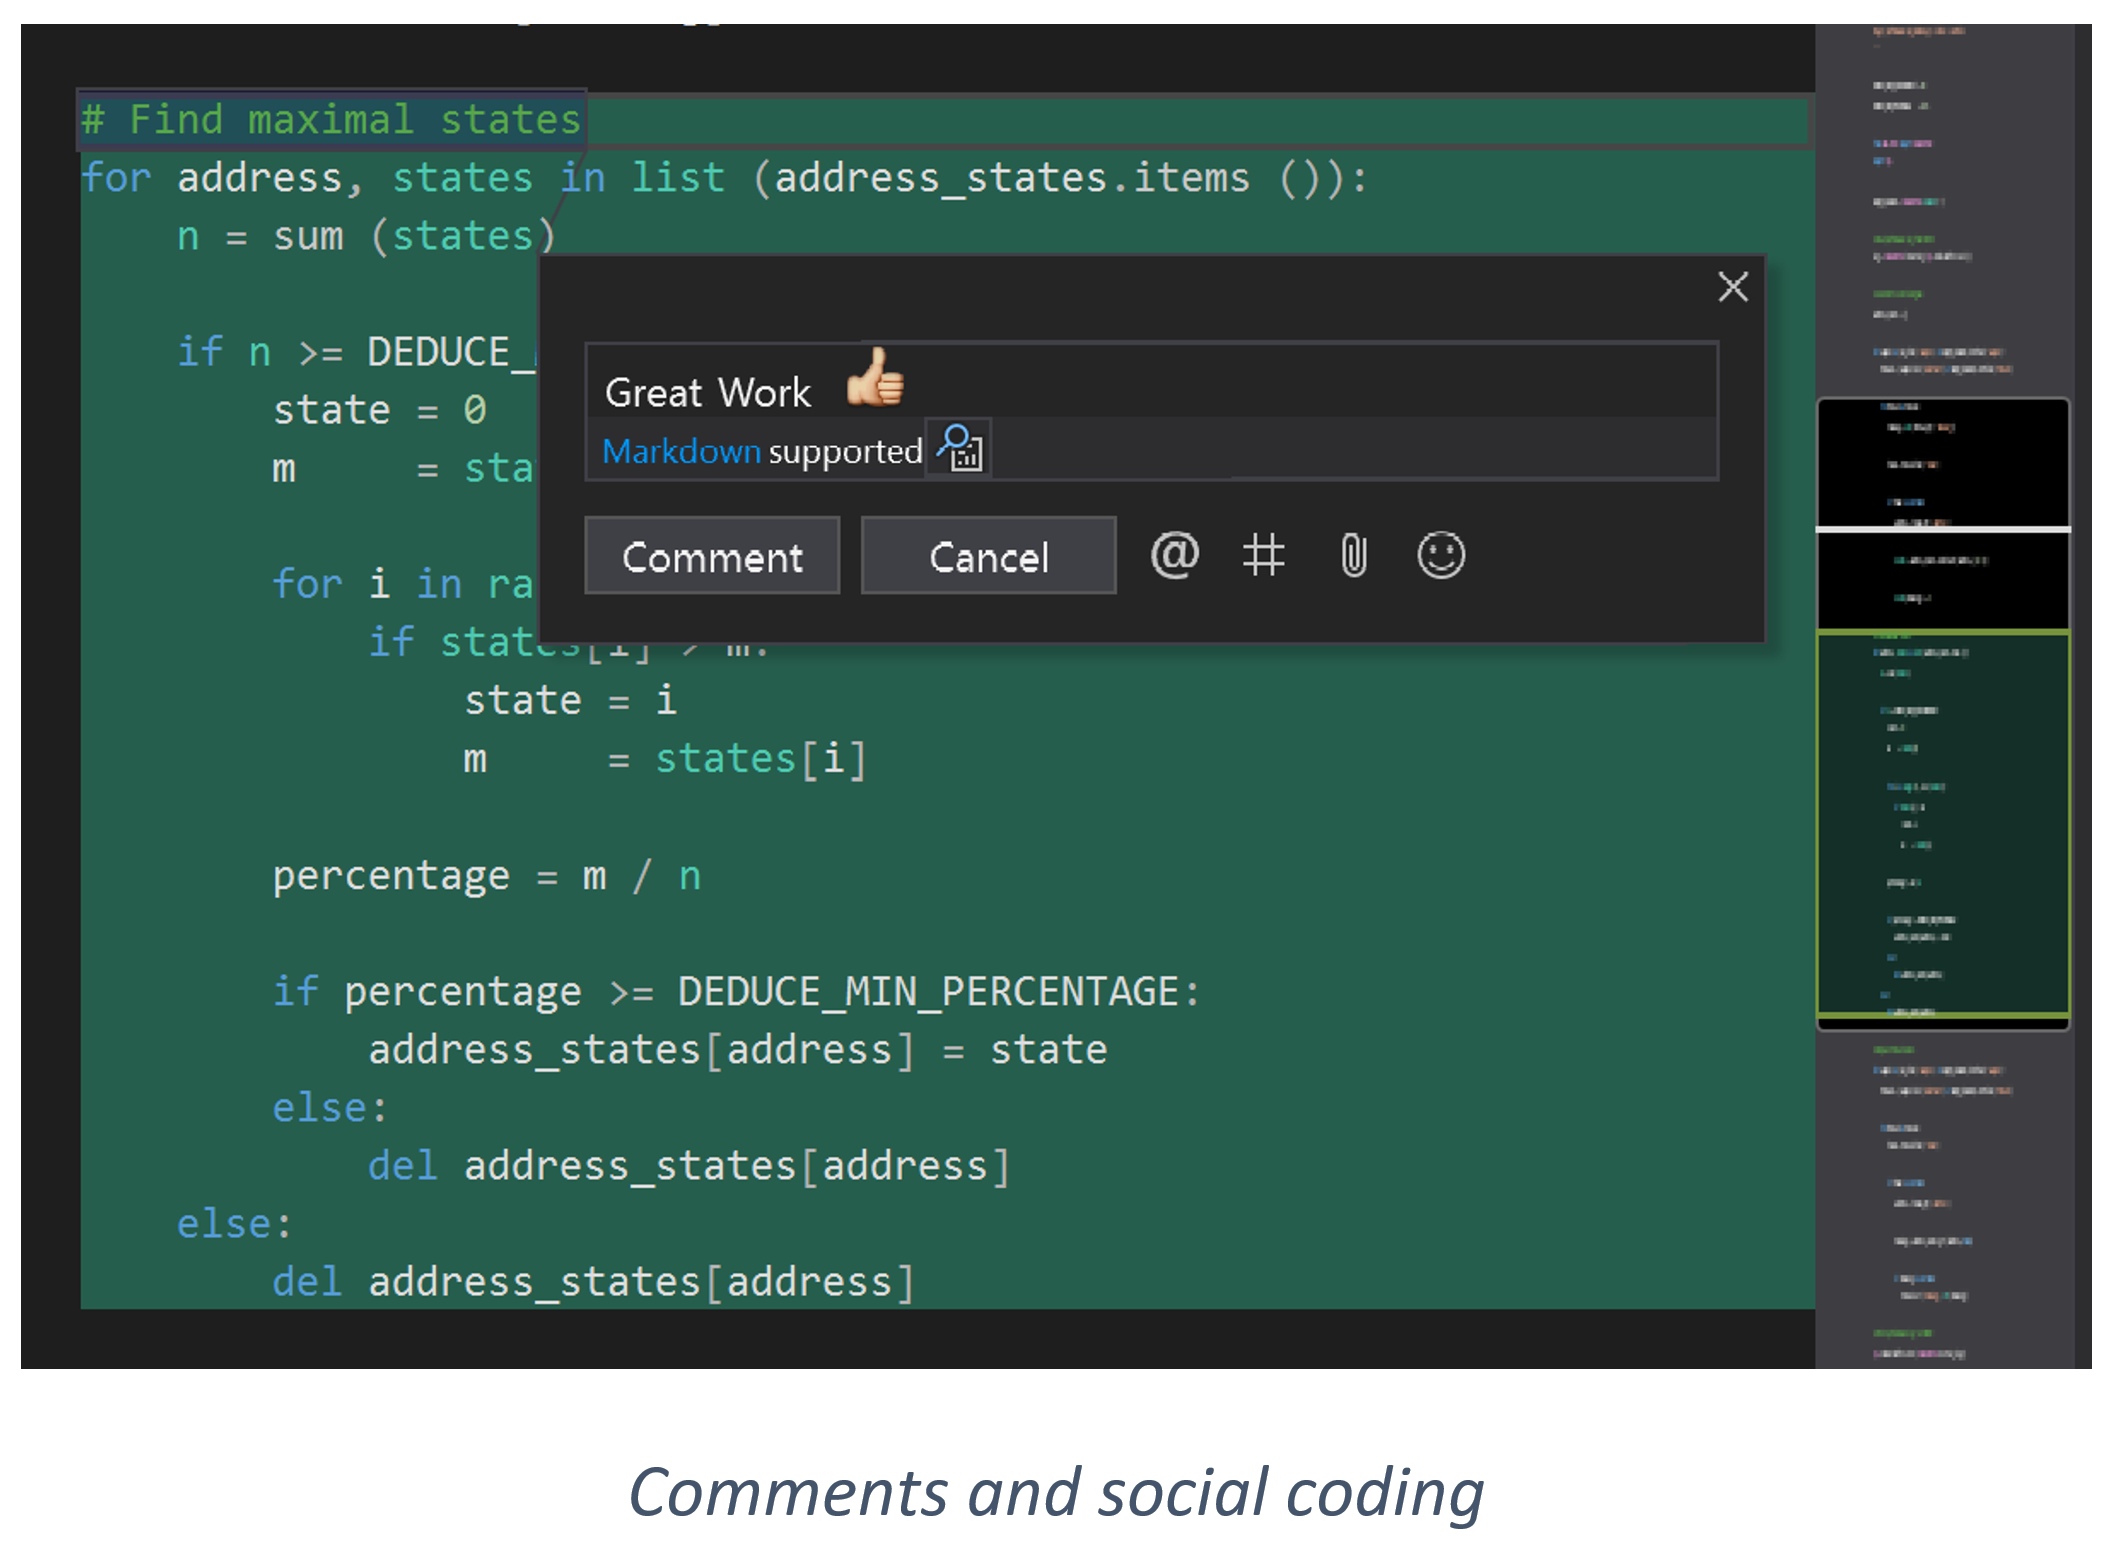 Social coding with comments vs2019